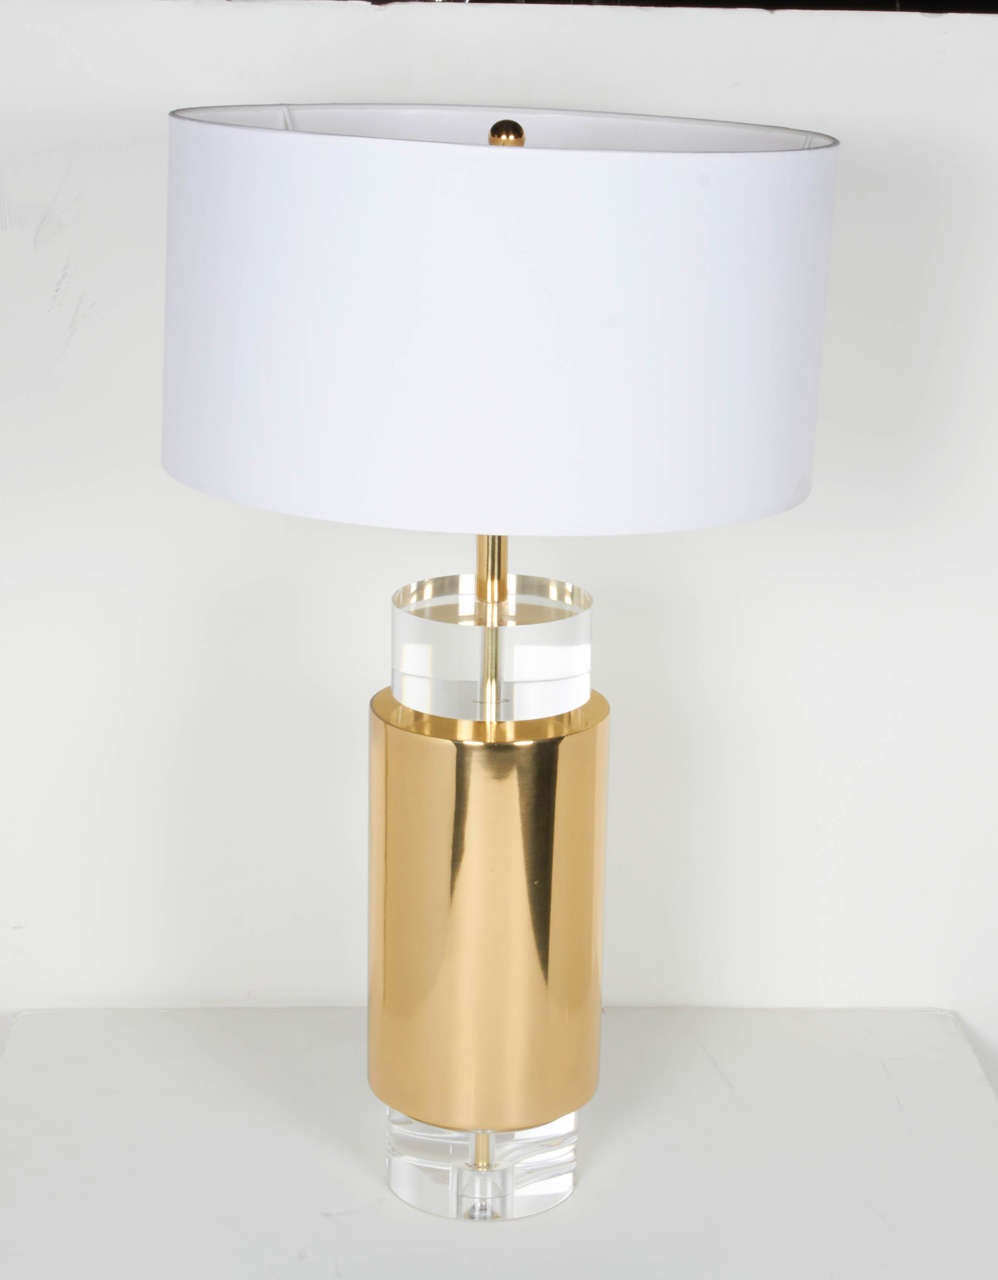 Pair of modernist lamps with cylindrical forms. Comprised of satin brass column centers with stacked circular Lucite top and base. Uber chic design featuring white silk drum shades and brass fittings.